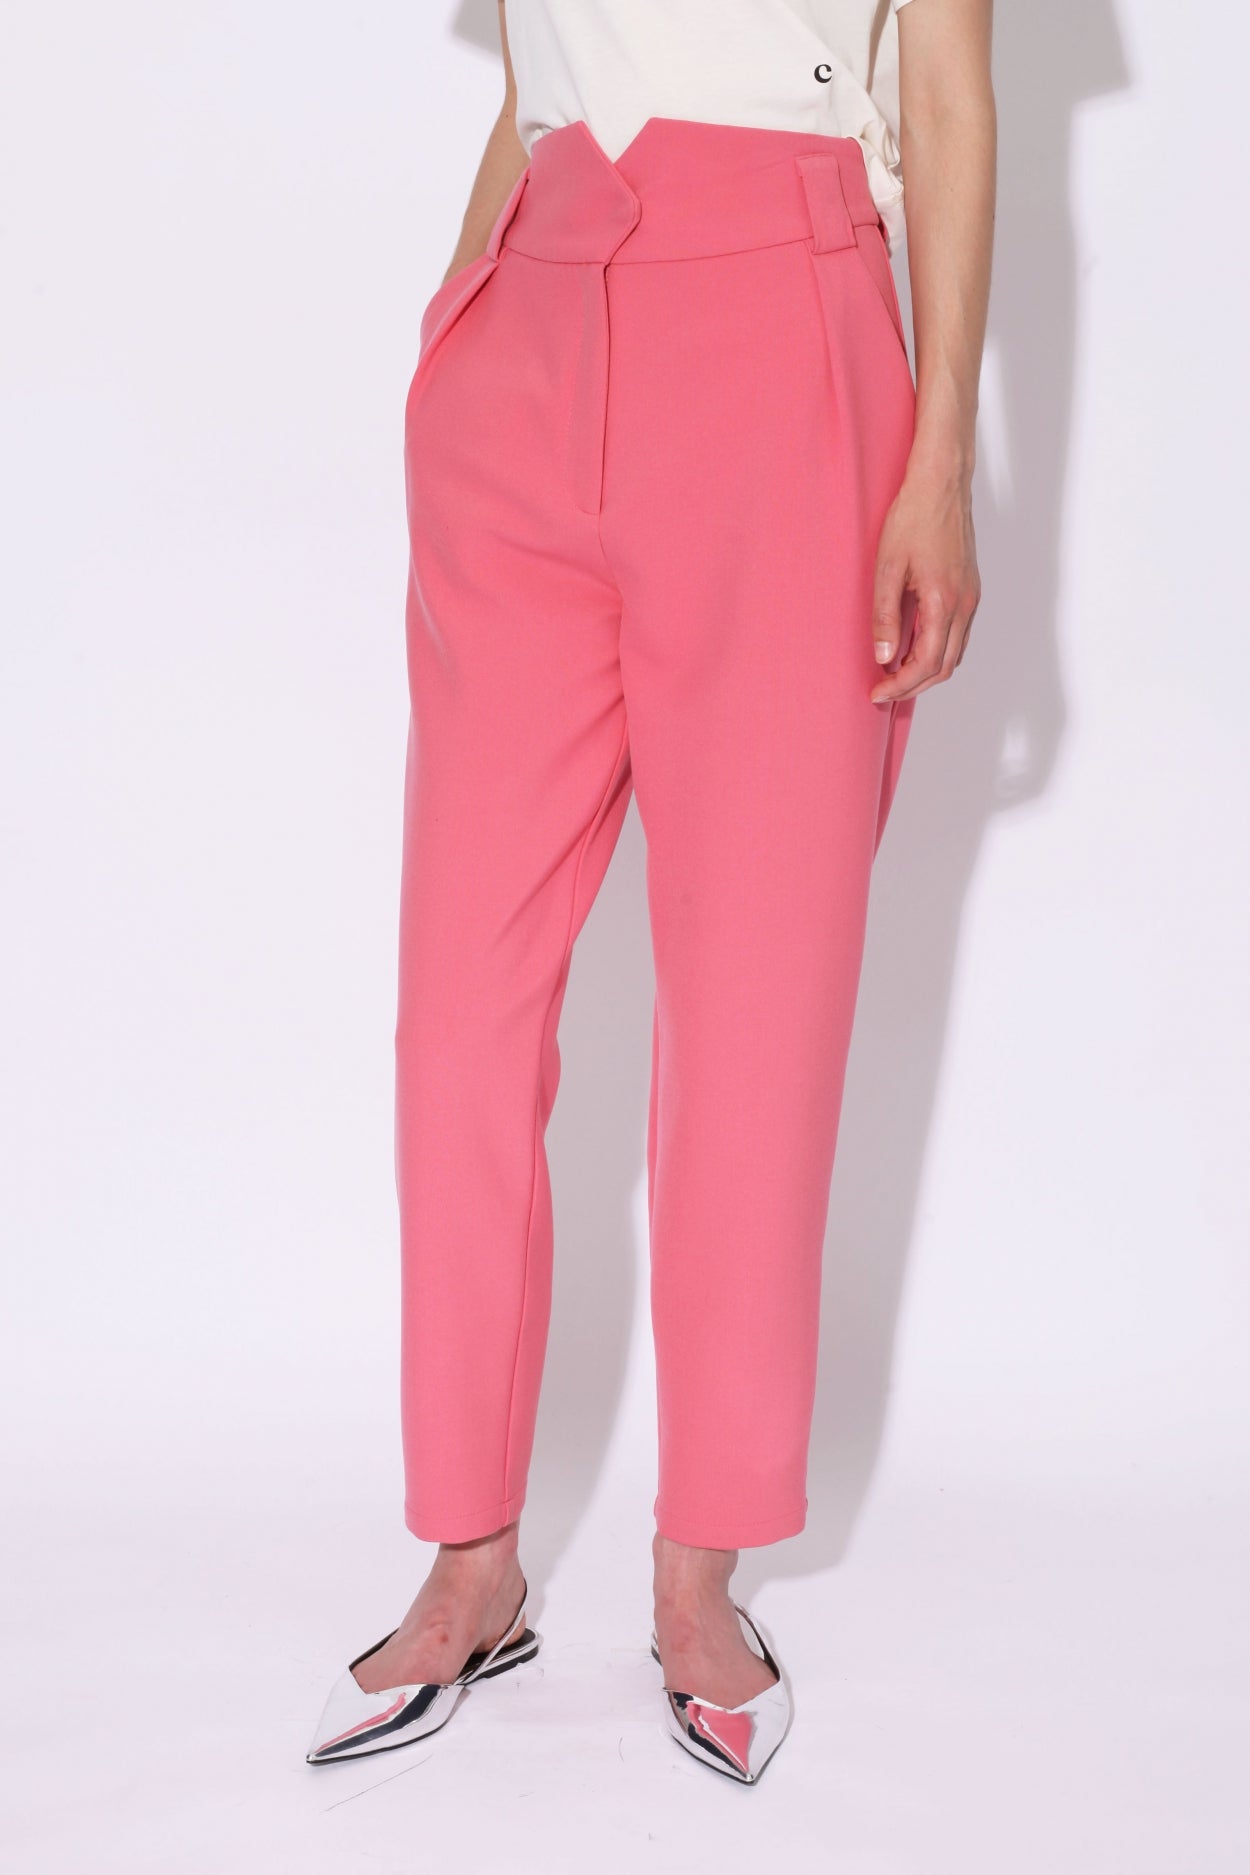 PACIFIC pants | PINK